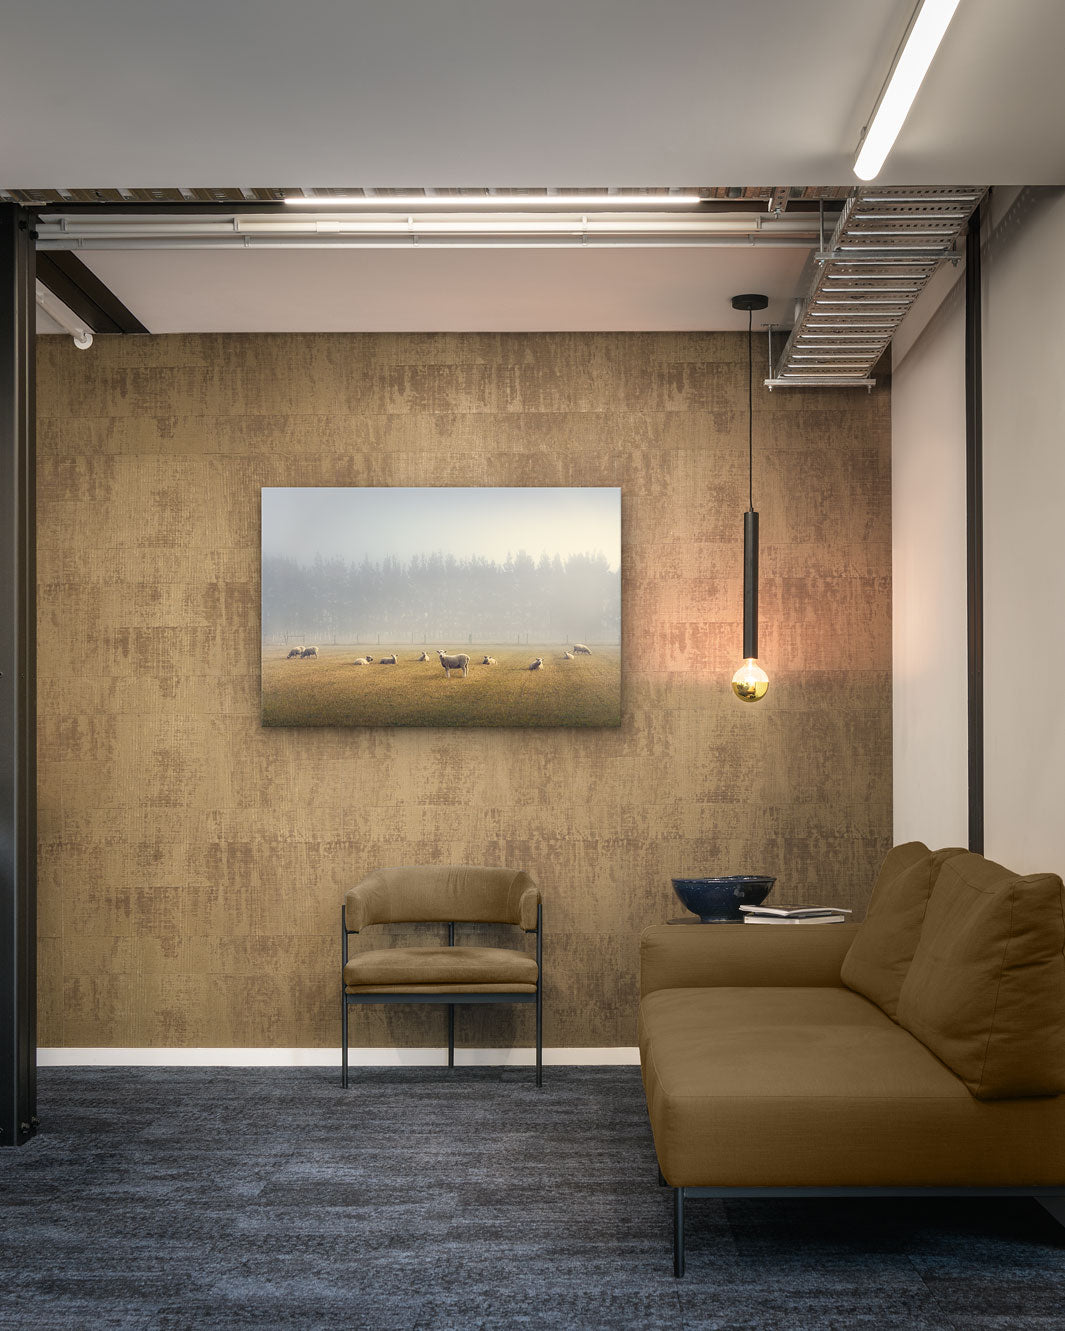 Canvas or photo wall art of sheep in a field on an office wall